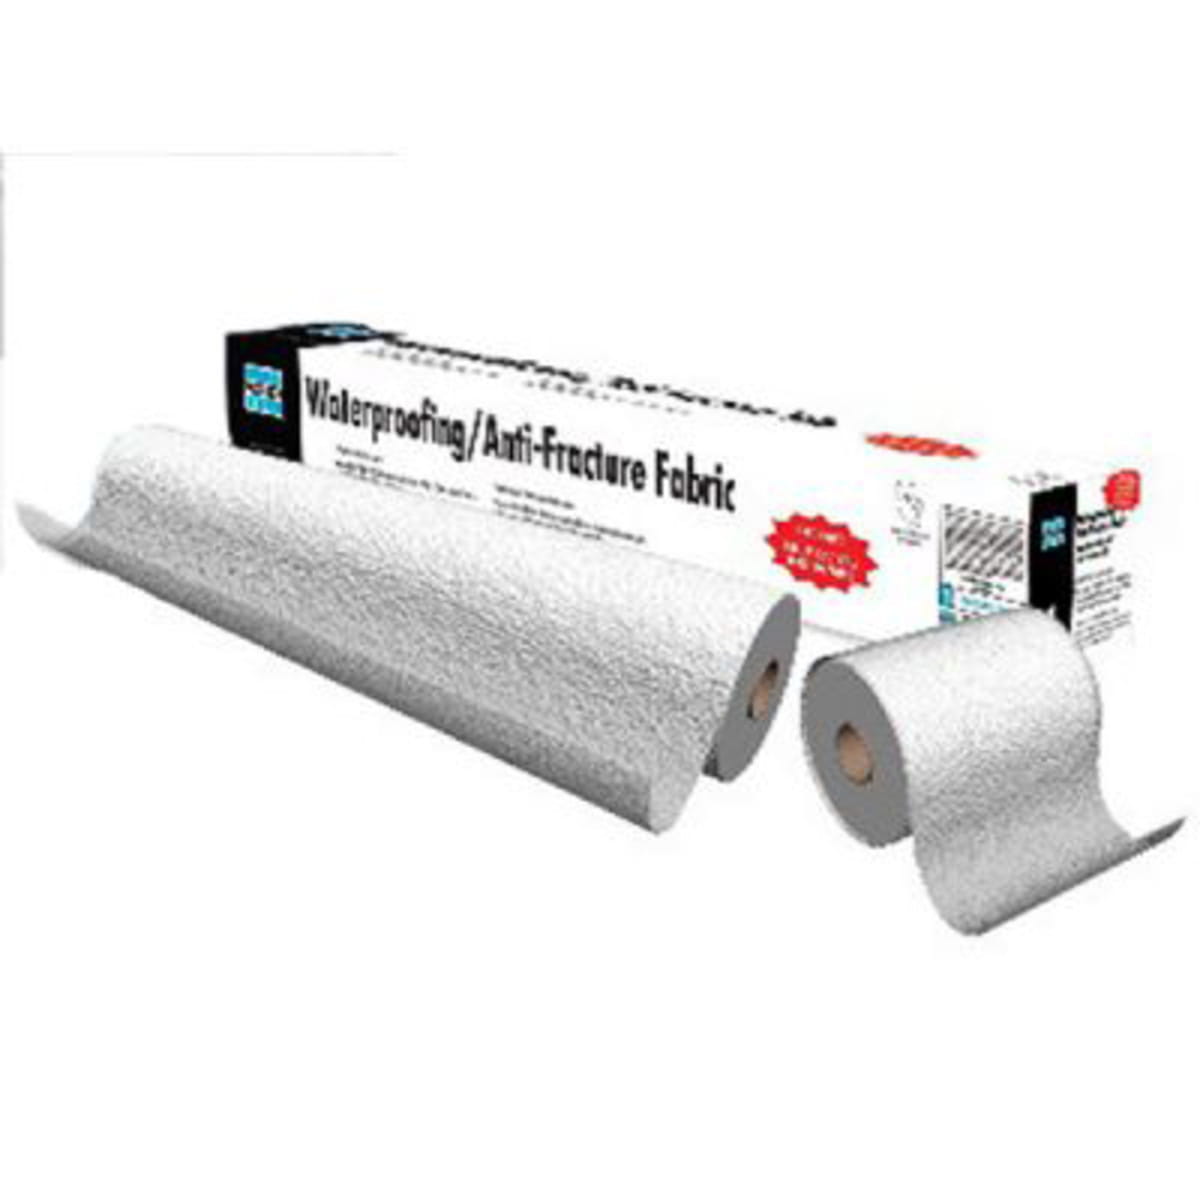 Waterproofing / Anti-Fracture Fabric